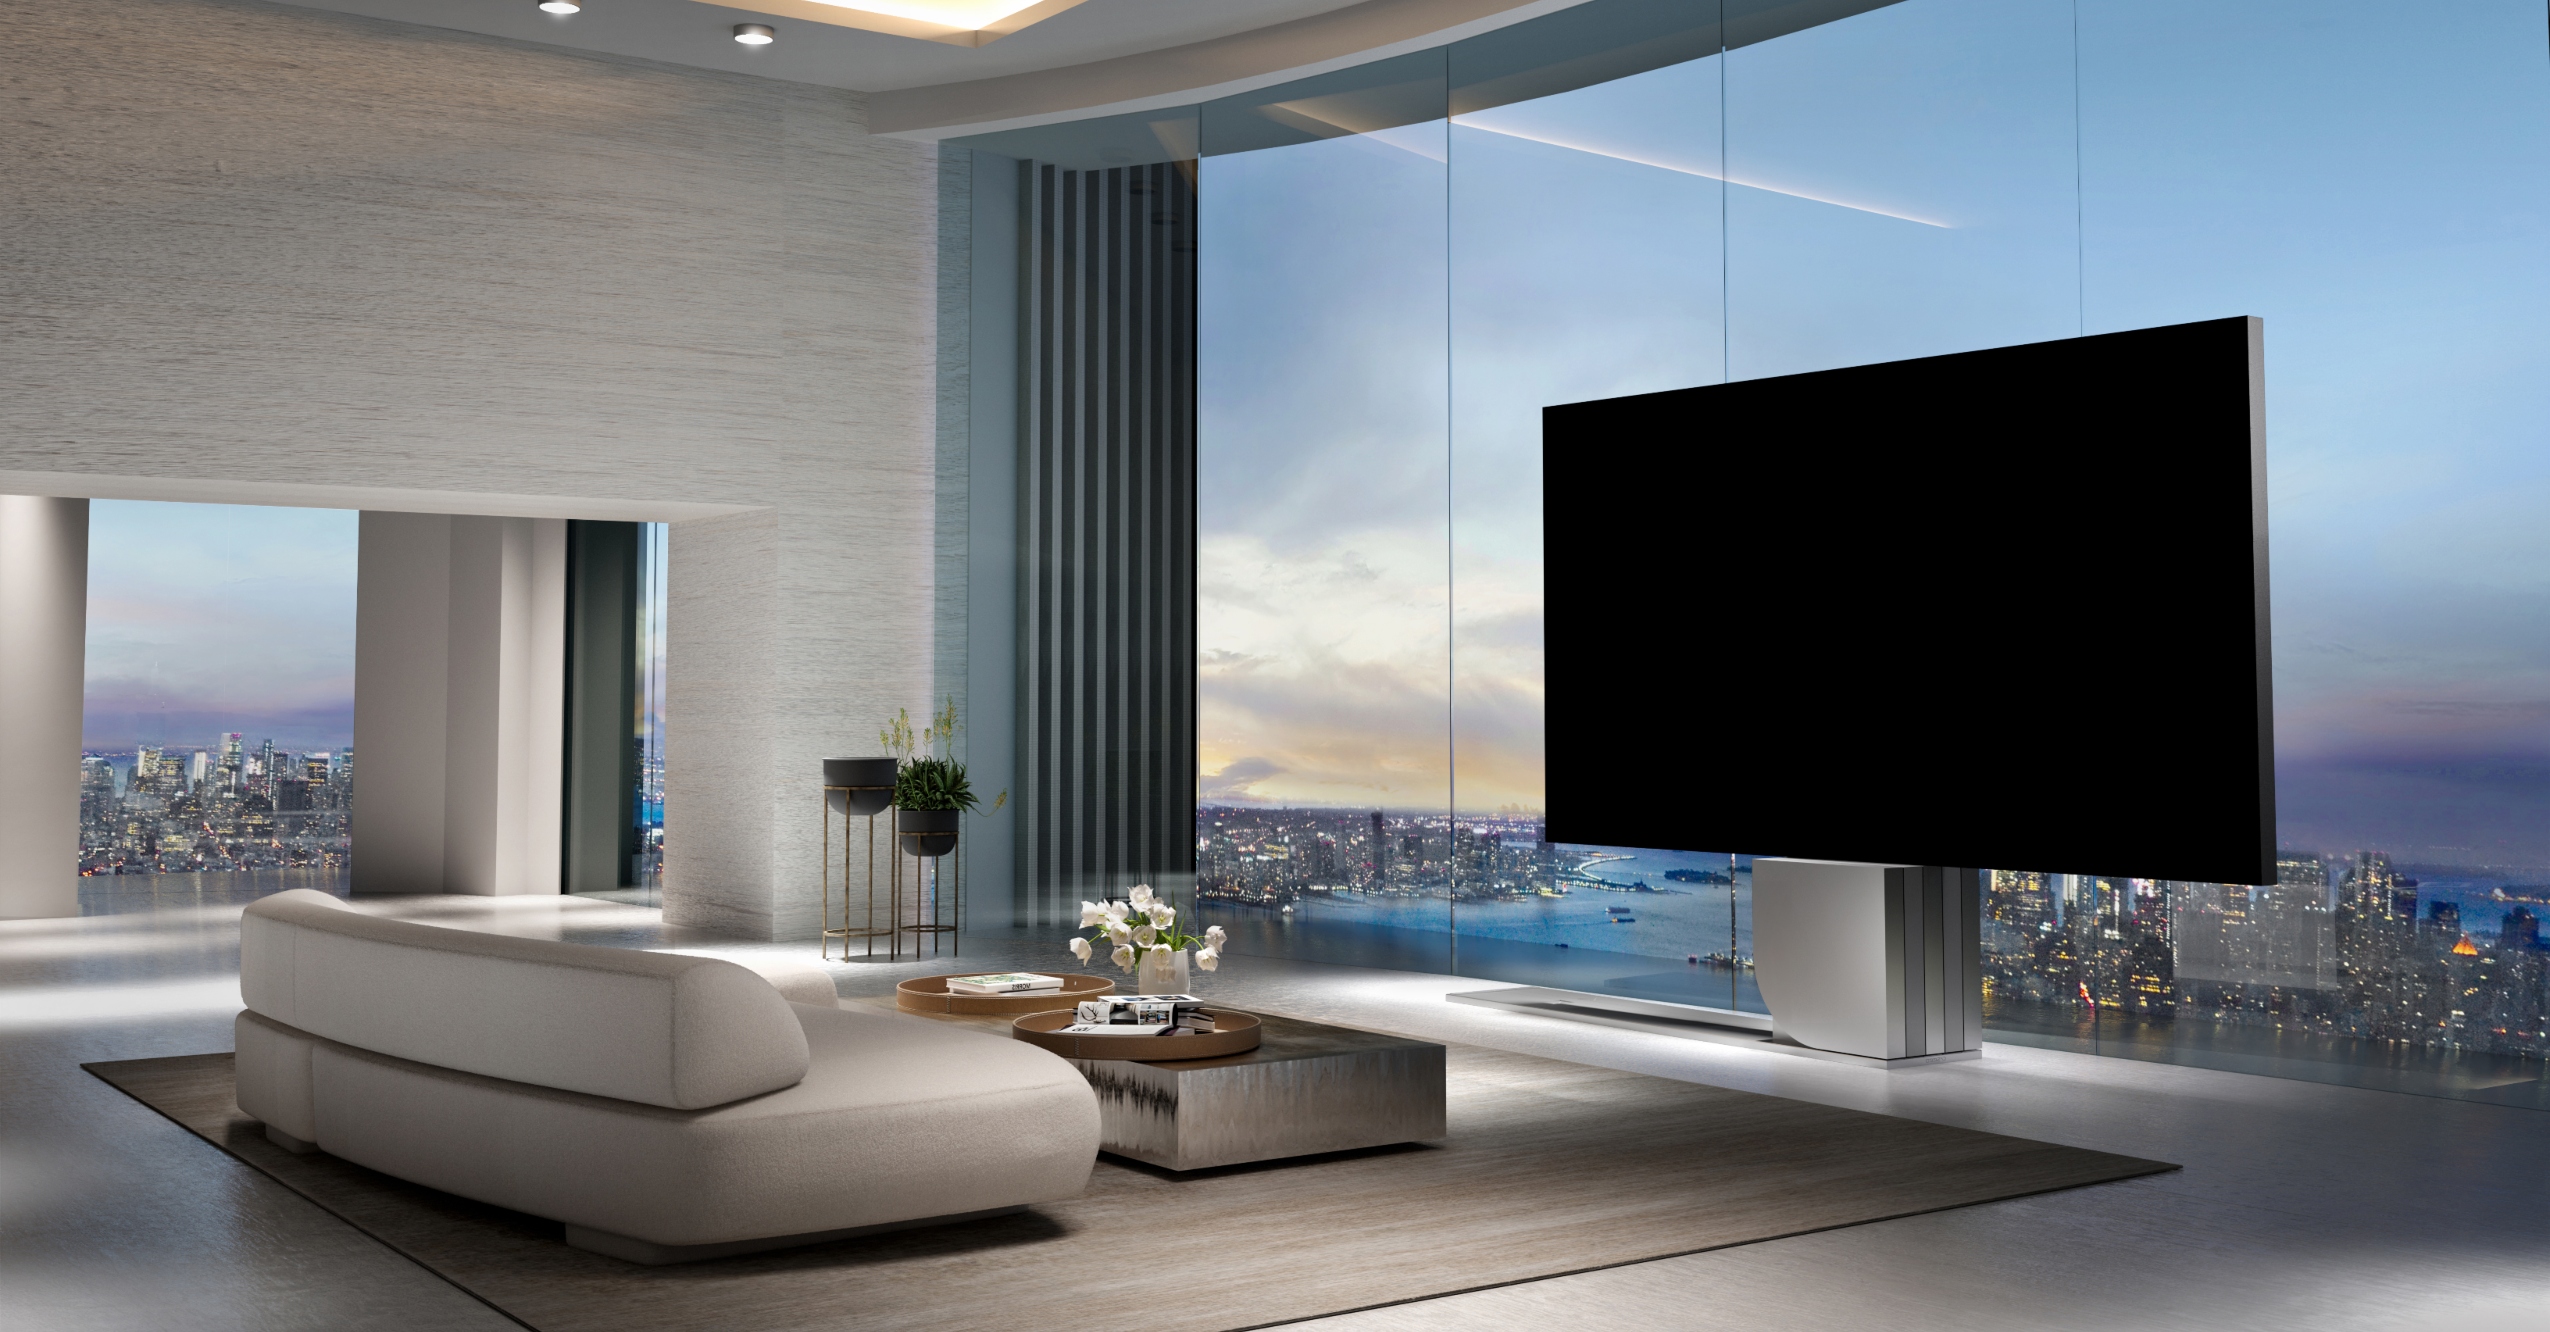 C Seed N1 Tv Feature C-Seed Debuts World'S First 137-Inch Folding Tv